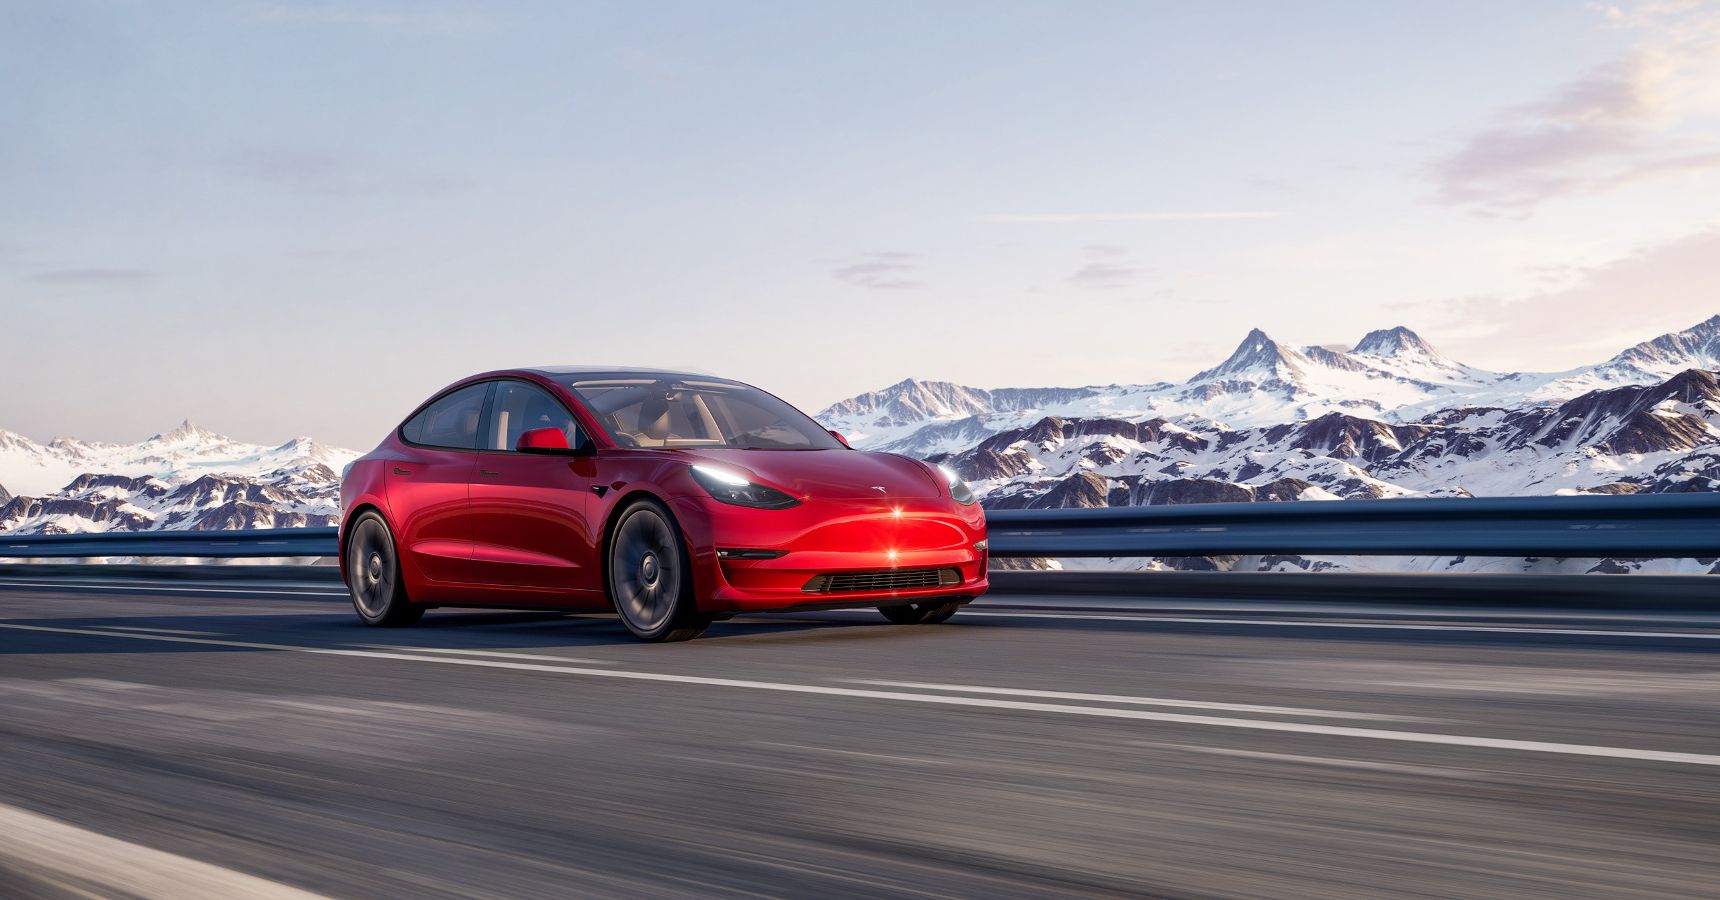 Why The Tesla Model 3 Is The Cheapest Vehicle To Maintain And Repair